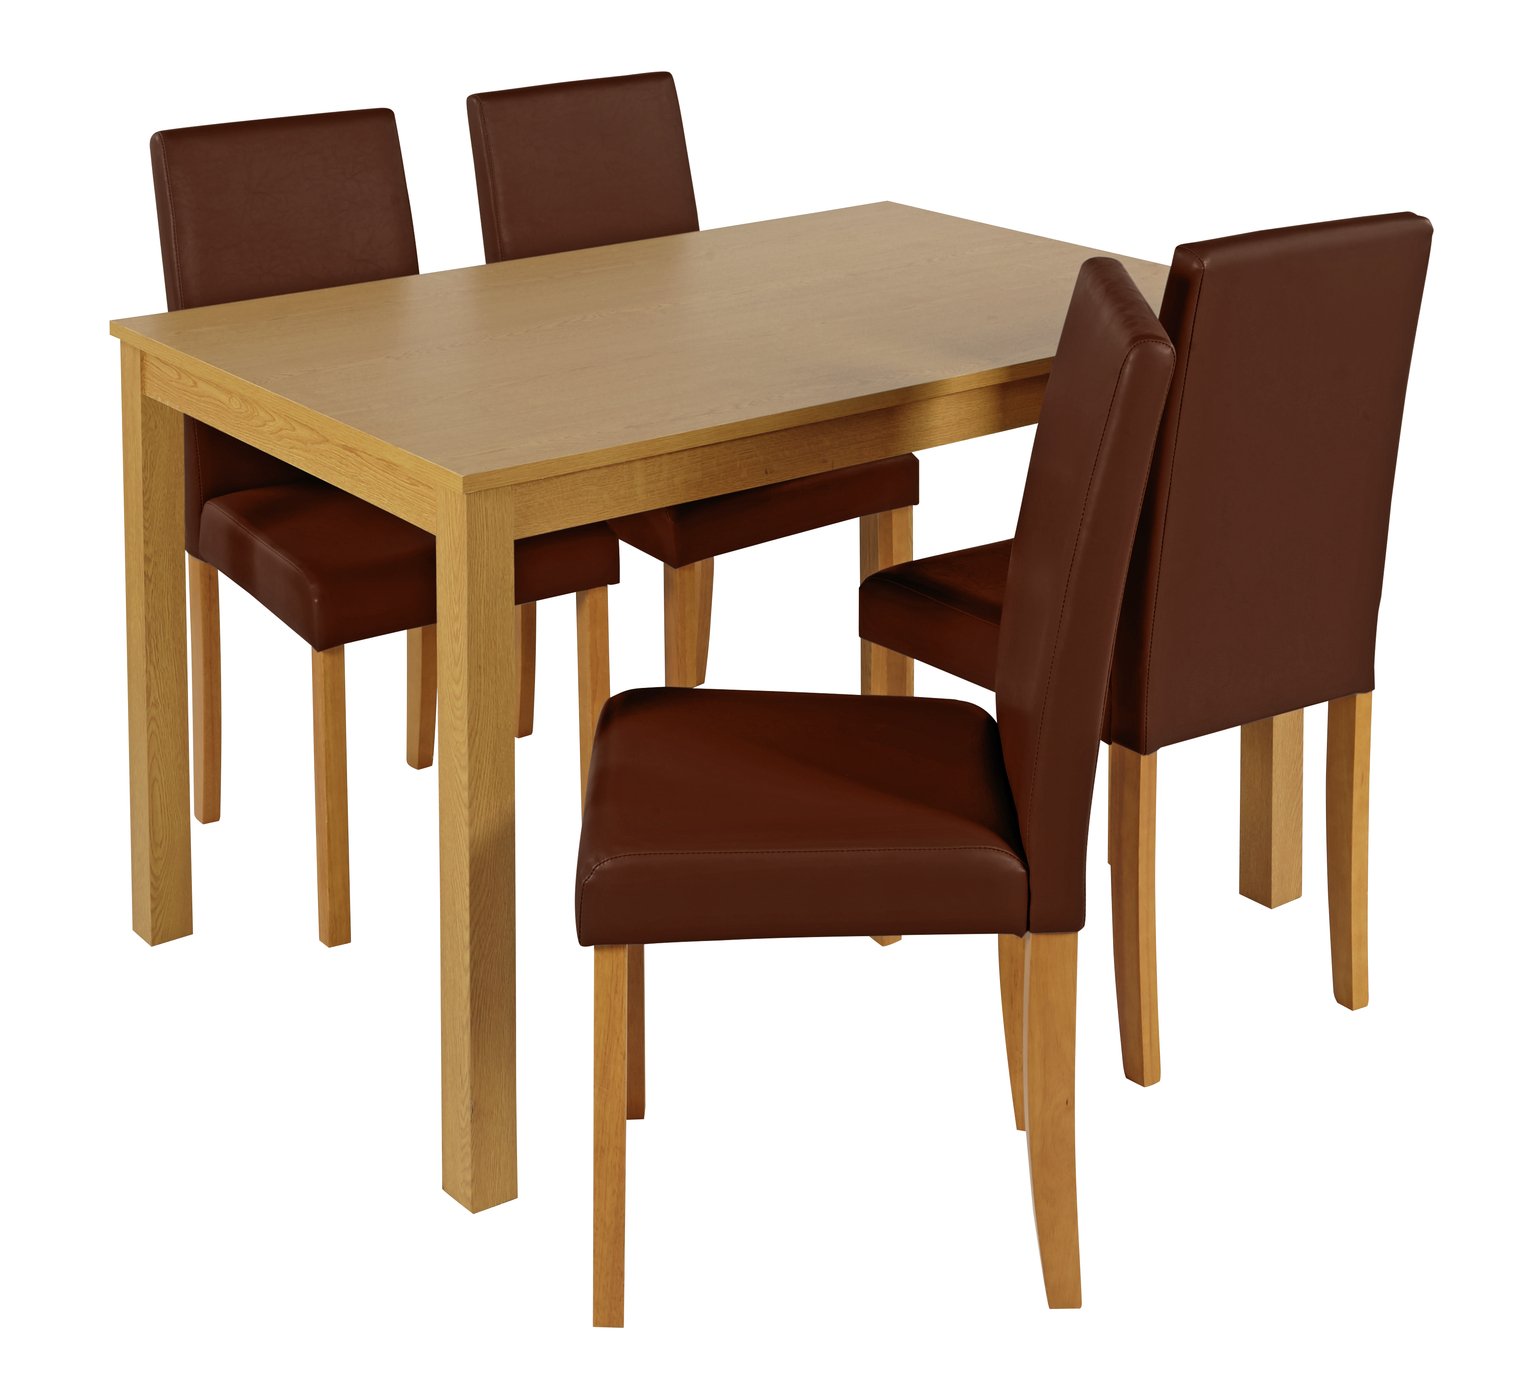 Argos Home Elmdon Oak Effect Dining Table & 4 Chairs - Choc